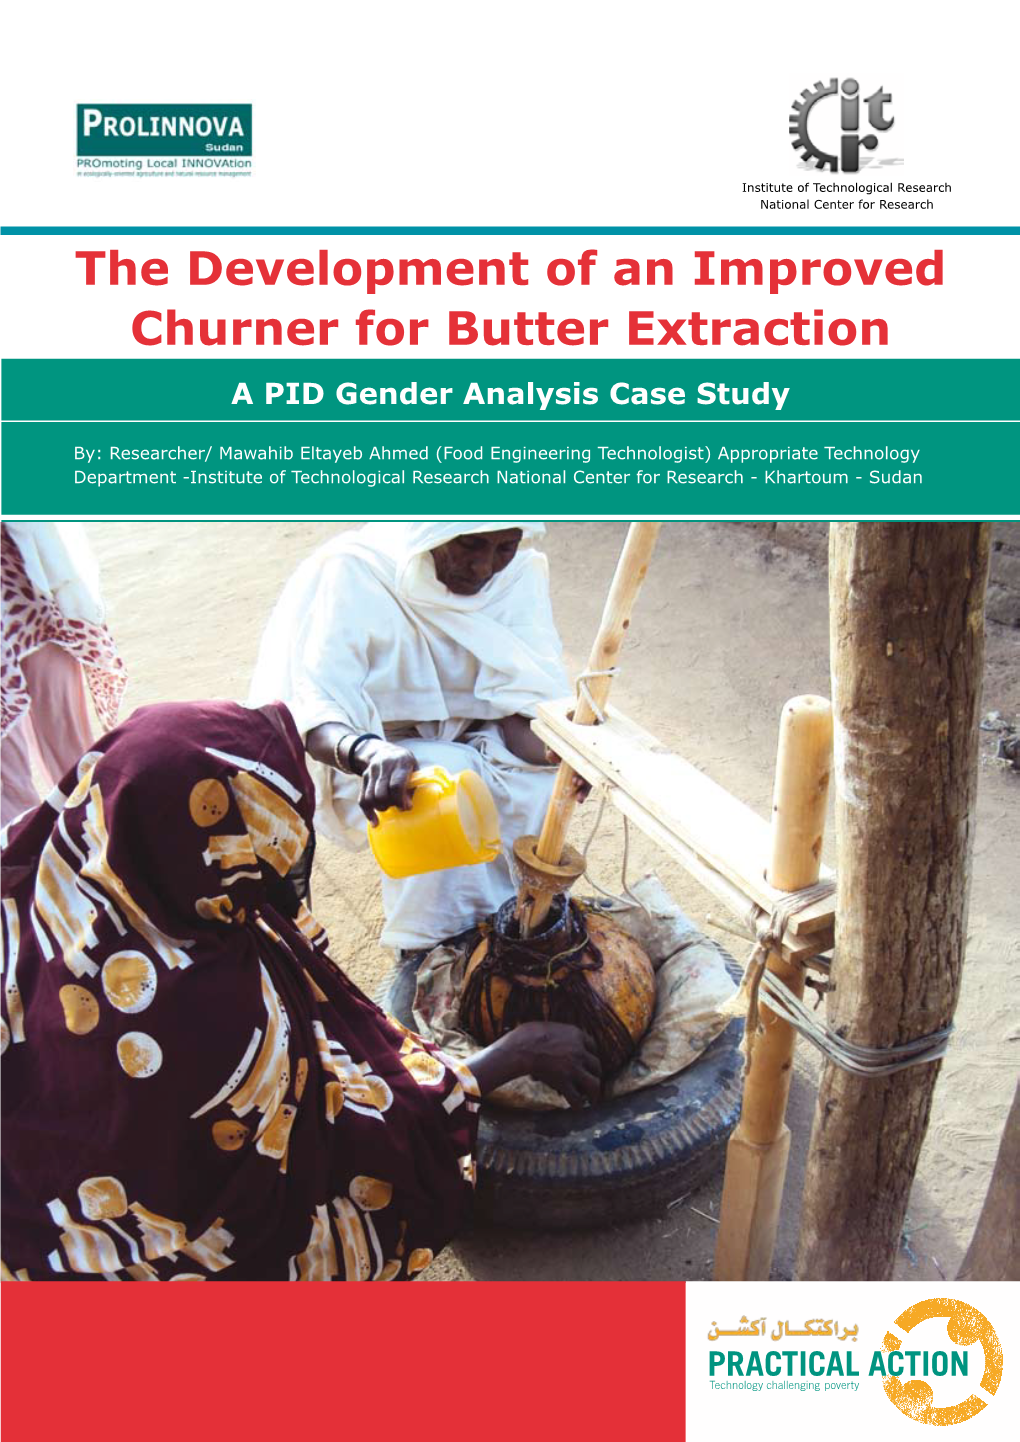 The Development of an Improved Churner for Butter Extraction a PID Gender Analysis Case Study